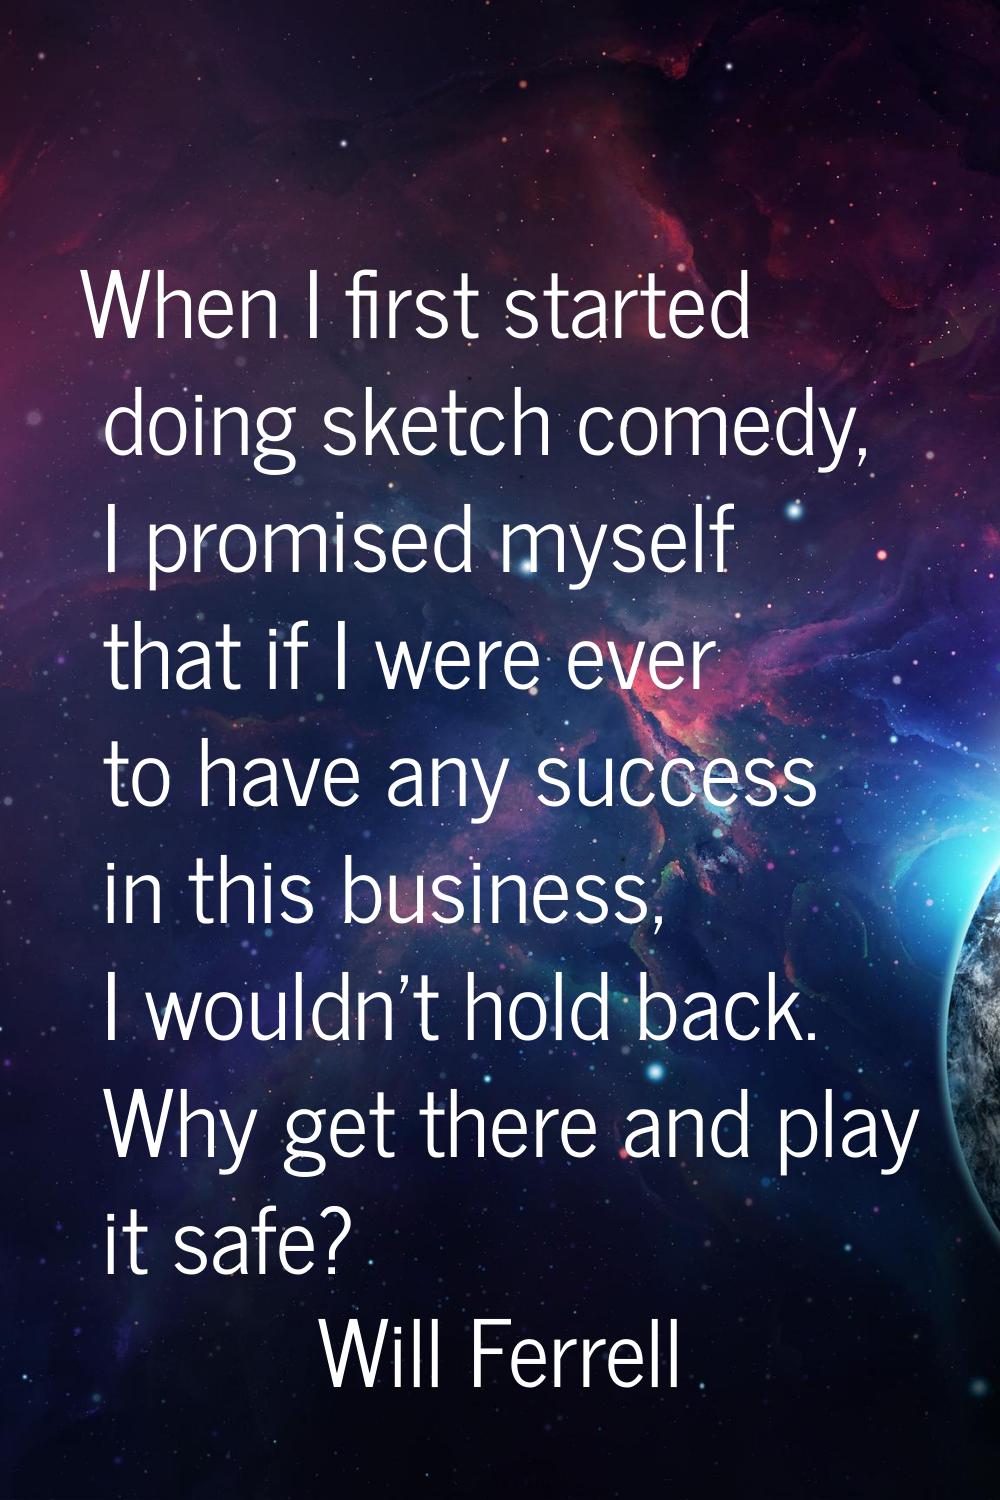 When I first started doing sketch comedy, I promised myself that if I were ever to have any success